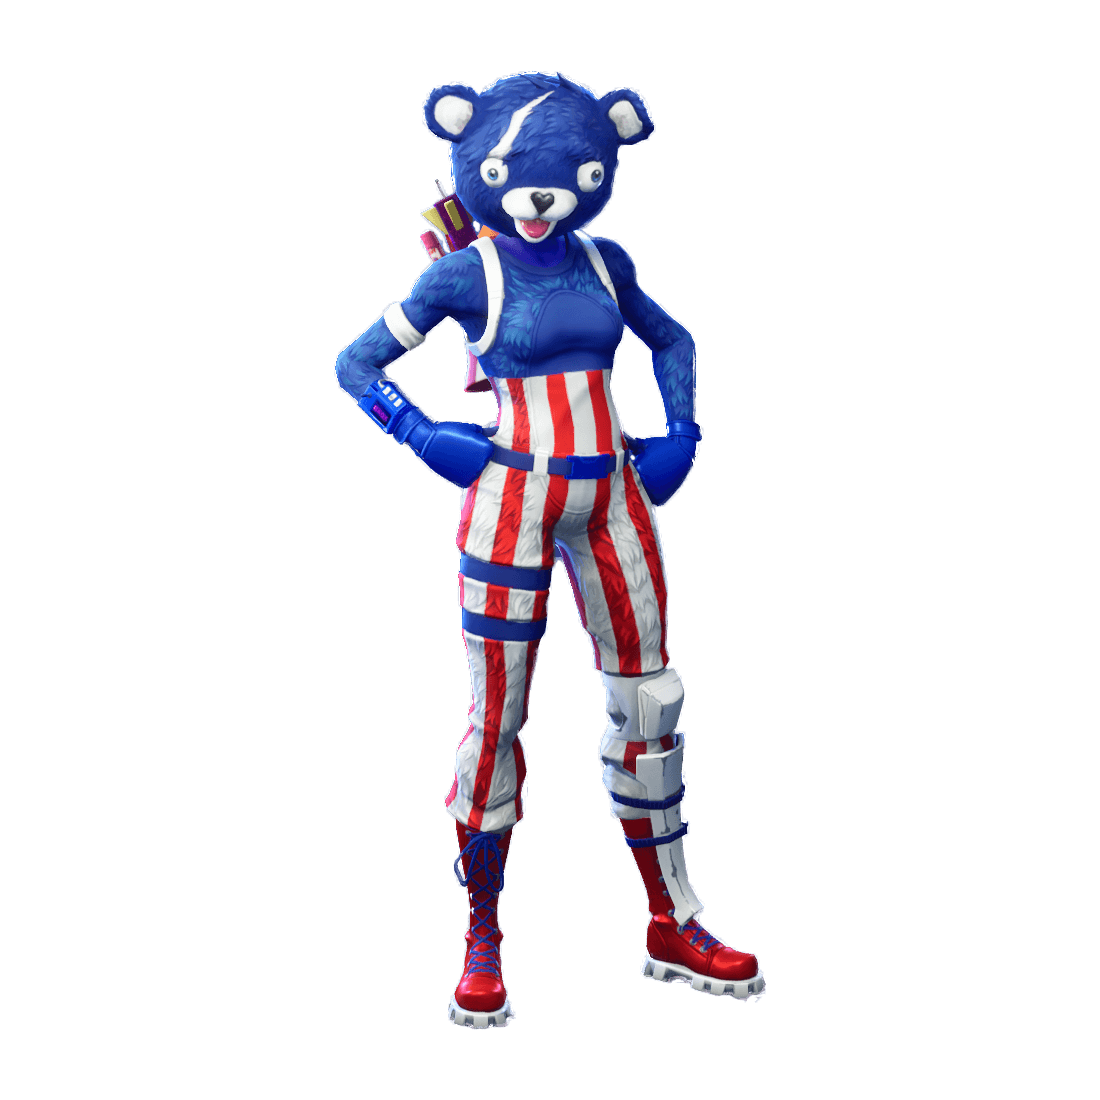 Epic Fireworks Team Leader Outfit Fortnite Cosmetic Cost 500 V